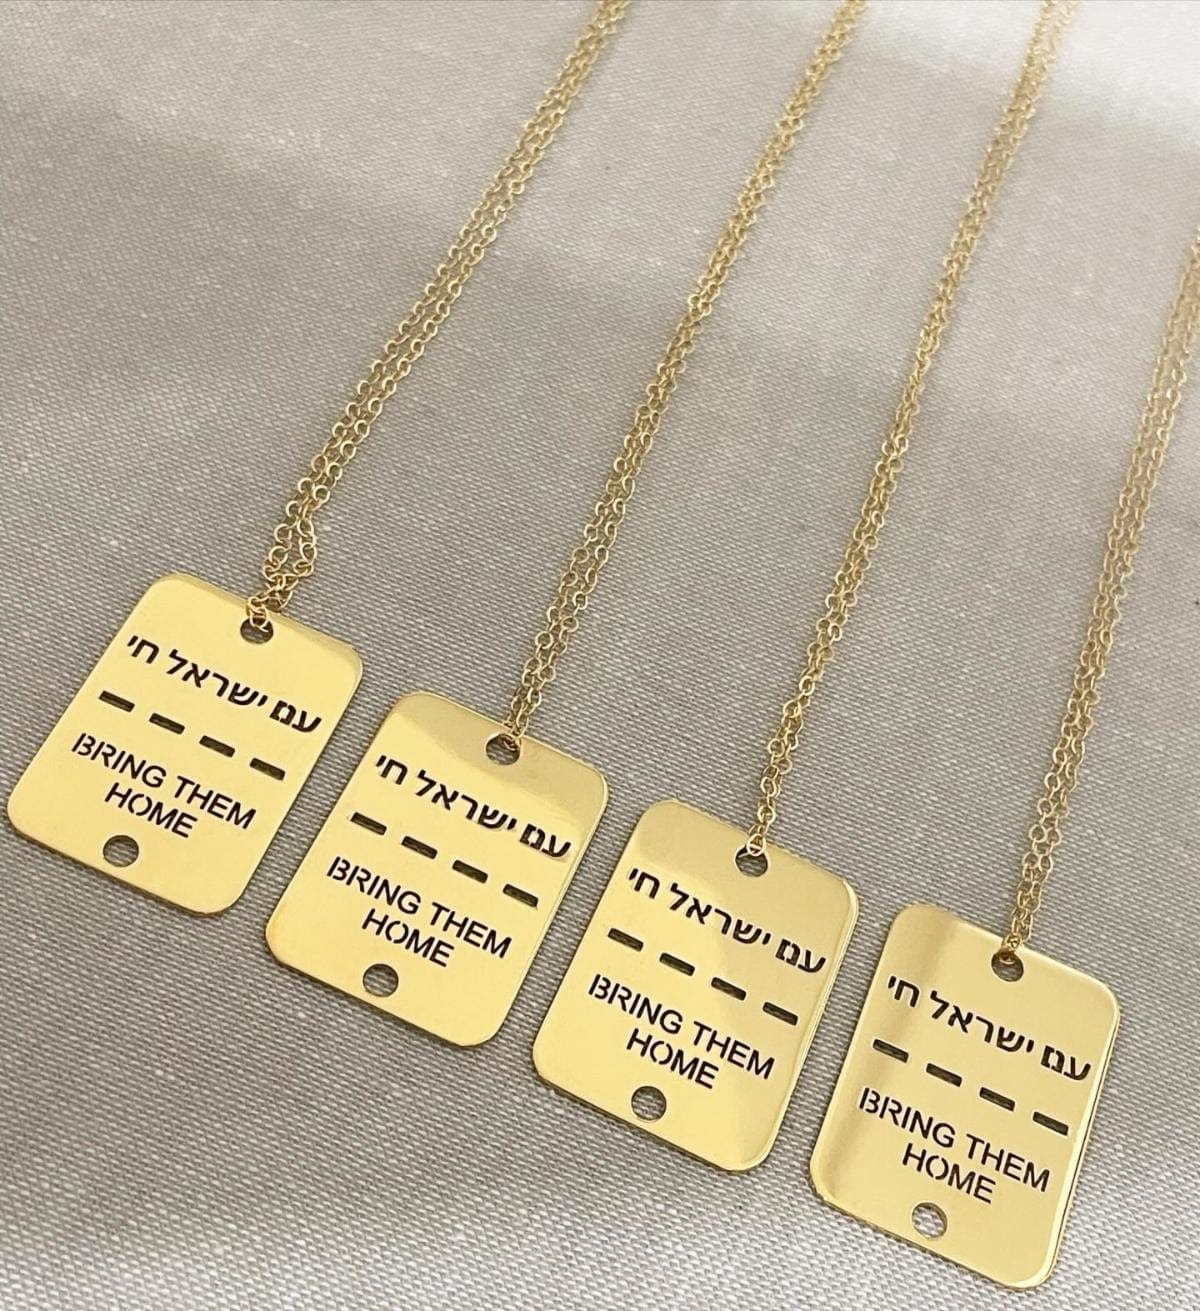 Miriam Merenfeld Jewelry Necklaces Gold Vermeil / 24" Bring Them Home Tag Necklace - Sterling Silver or Gold Vermeil - 100% of Profits Donated